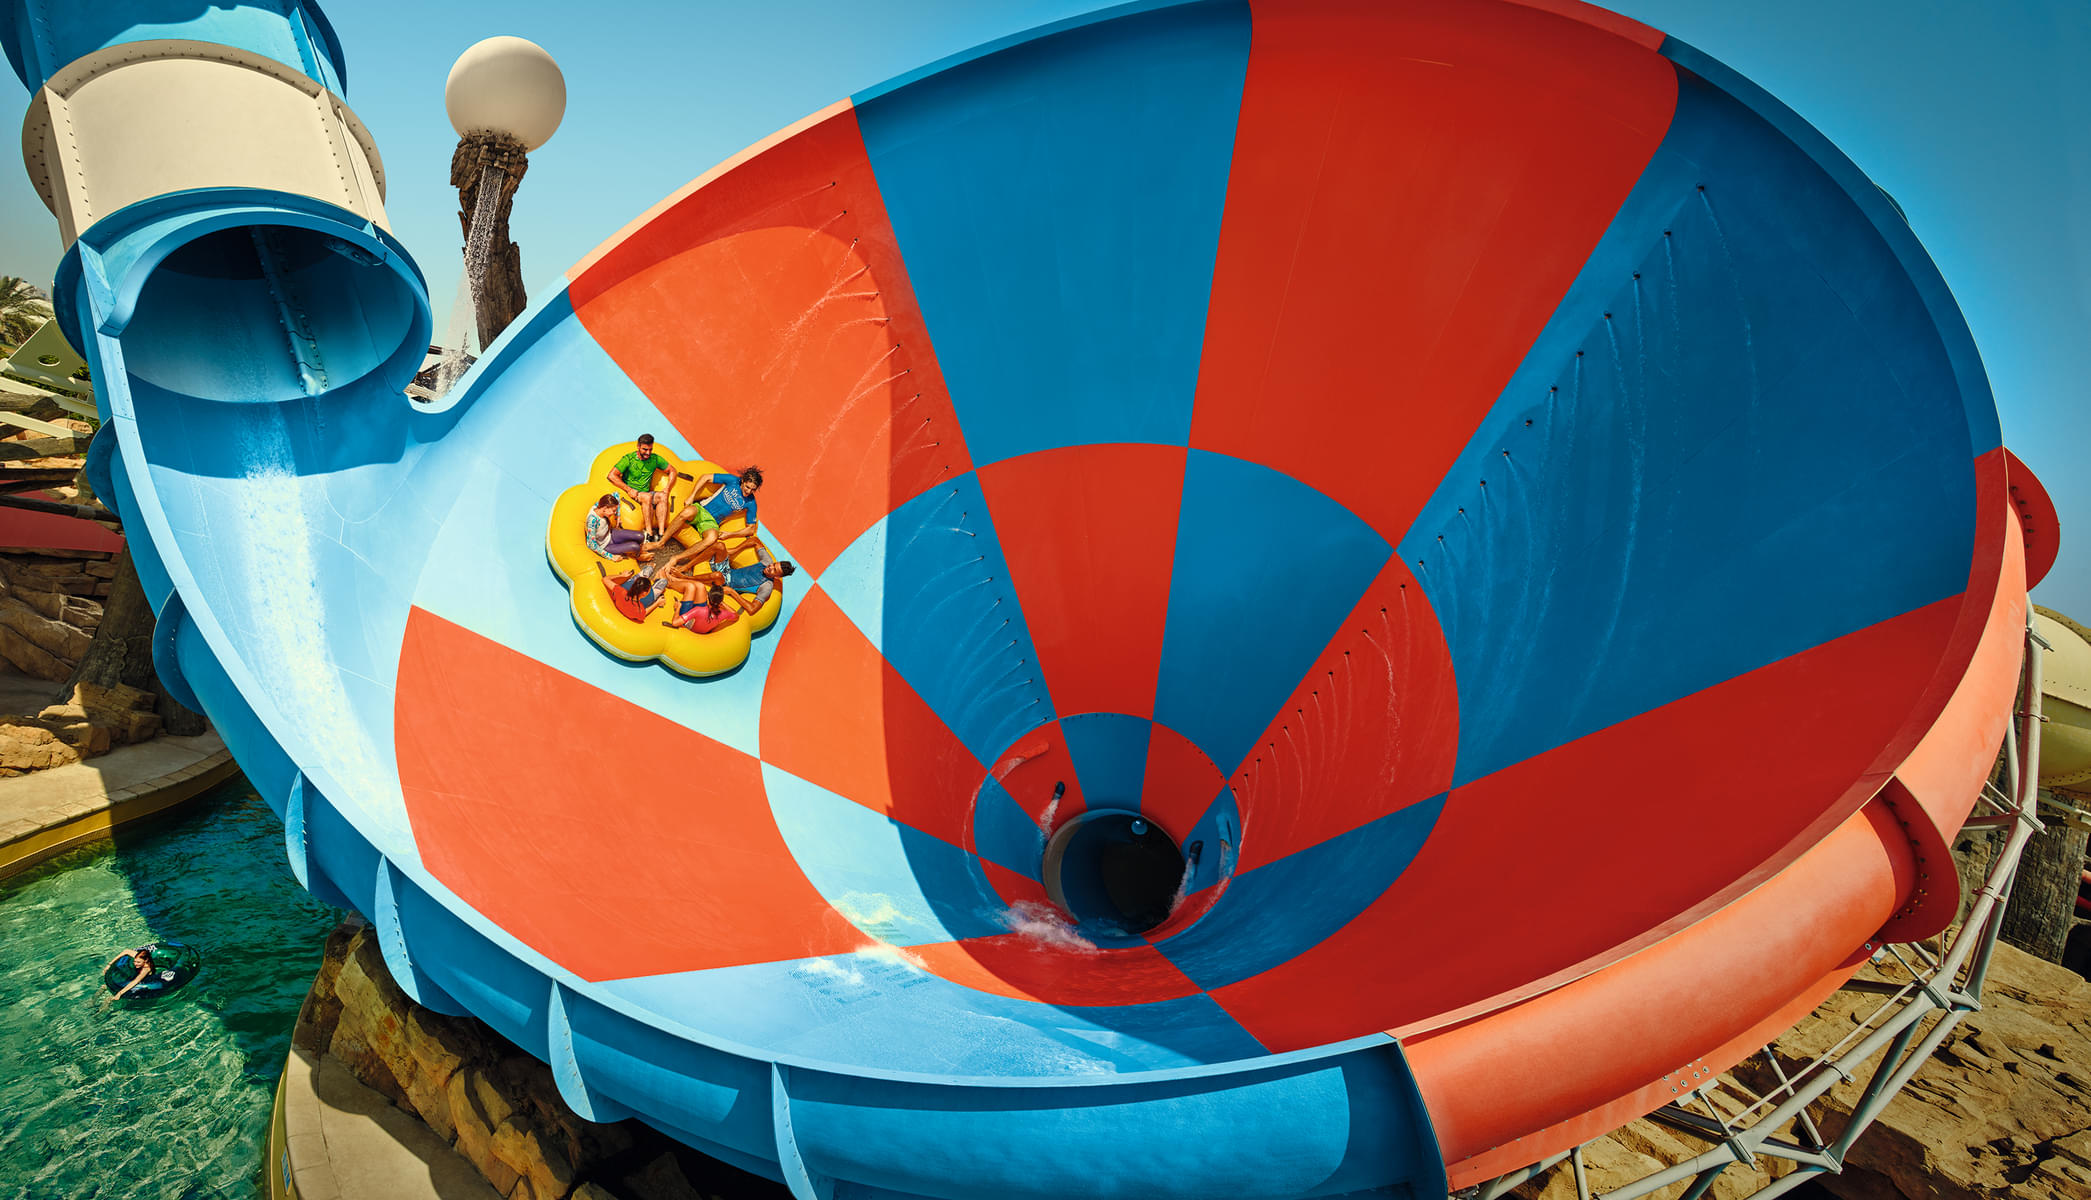 Plunge down the towering Dawwama waterslide, defying gravity and embracing the ultimate rush